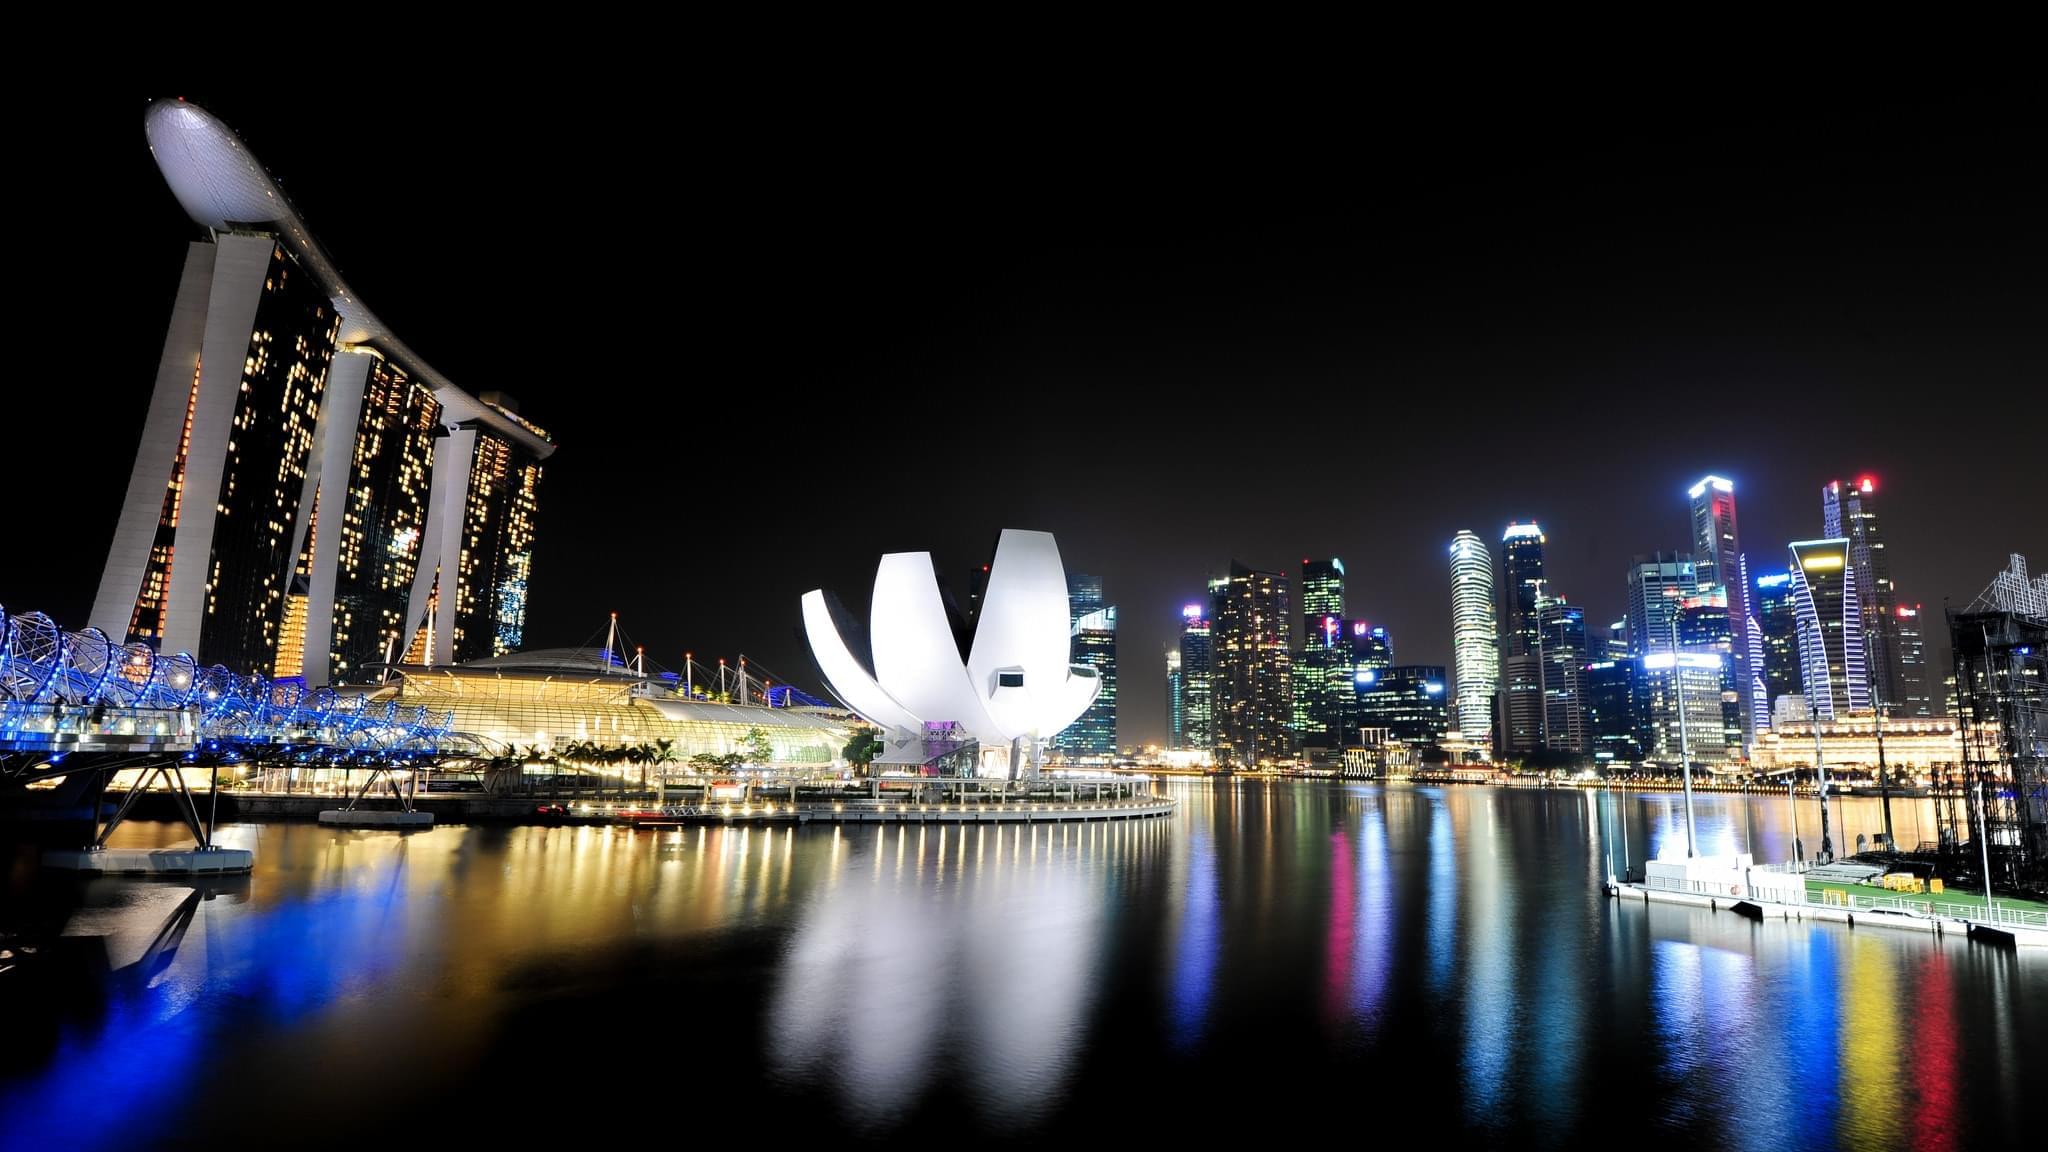 Night Attractions in Singapore